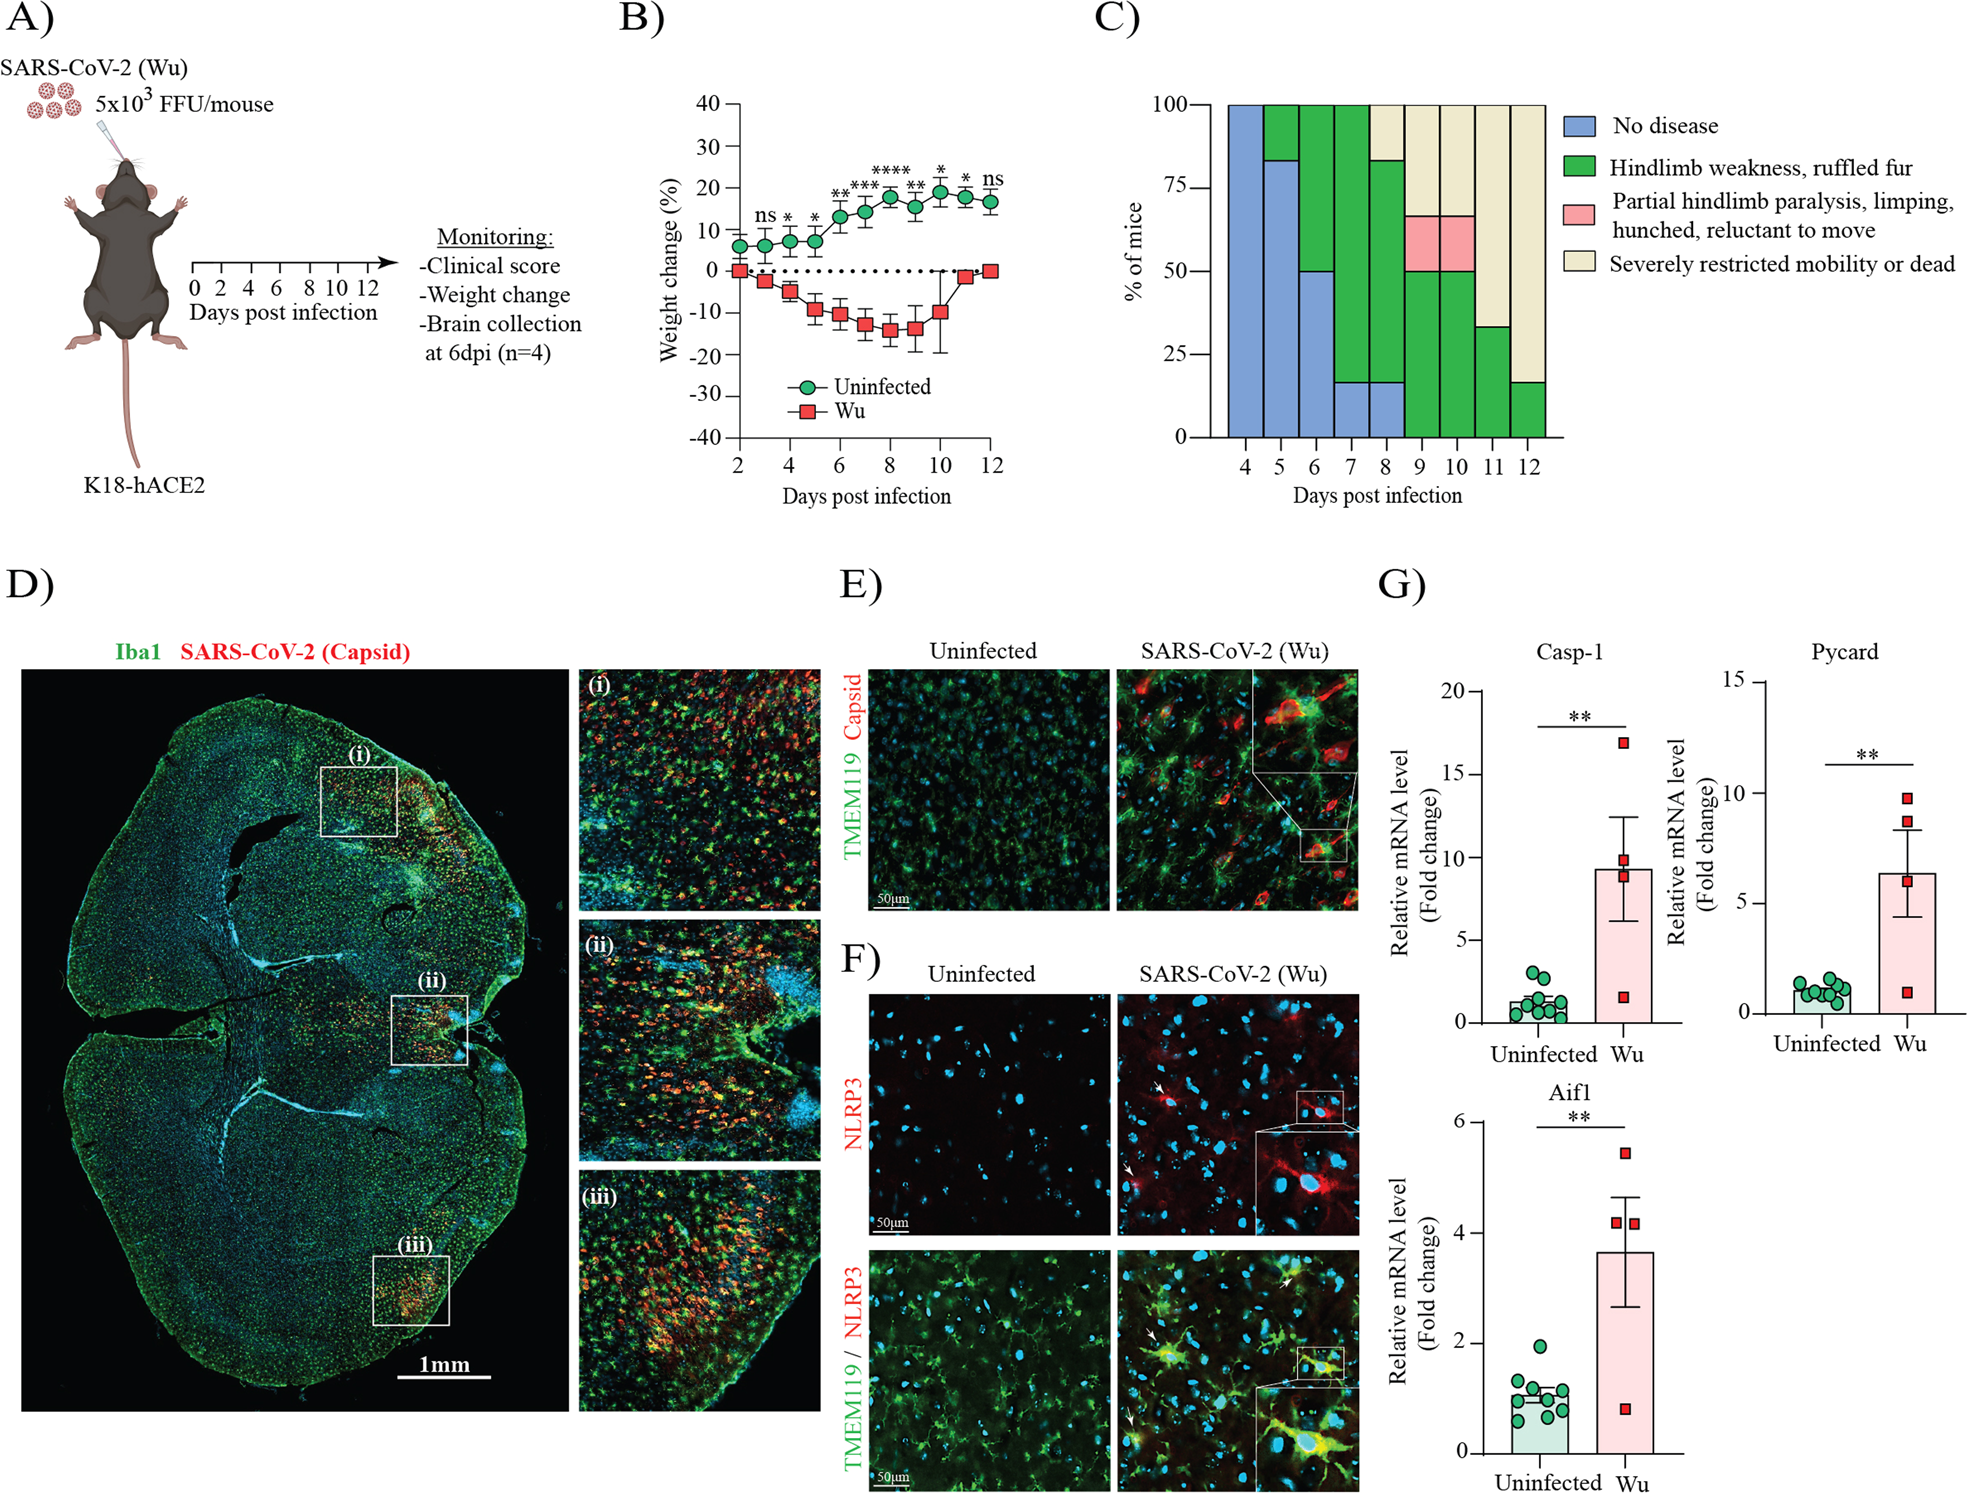 SARS-CoV-2 drives NLRP3 inflammasome activation in human microglia through spike protein